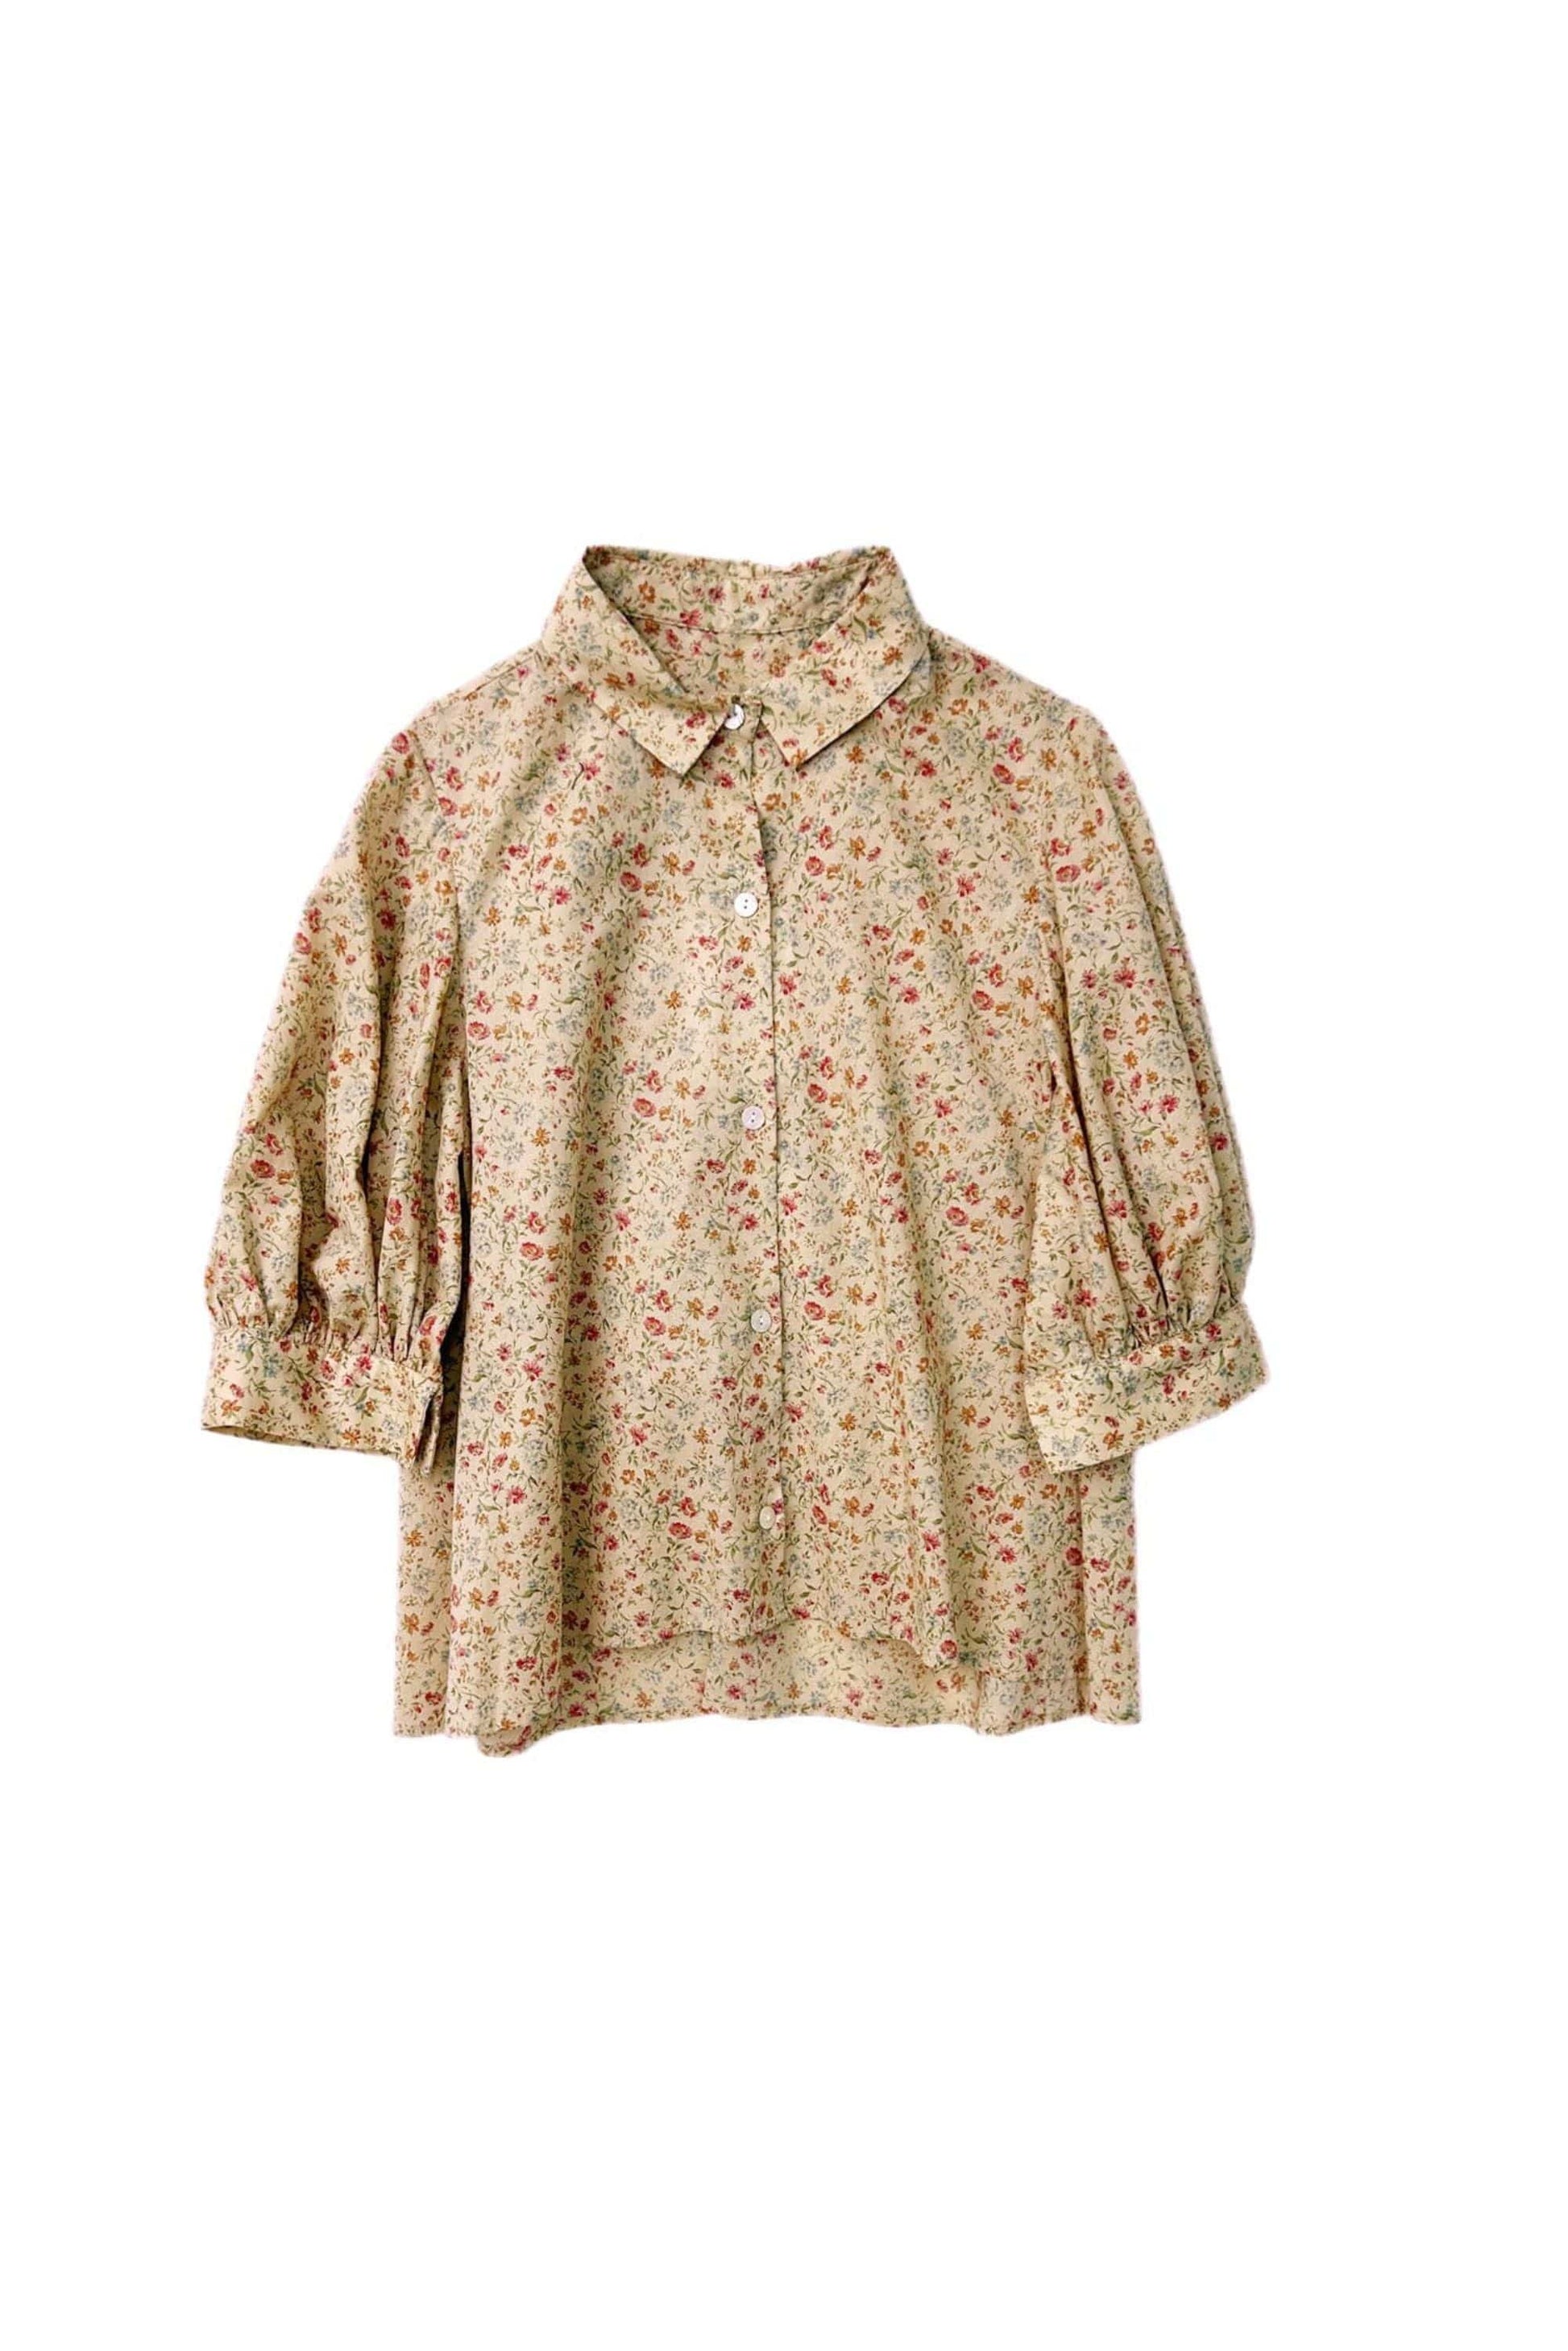 Sylvia Blouse in Cotton Floral Blouses CHRISTINE ALCALAY Tea Floral Extra Small 